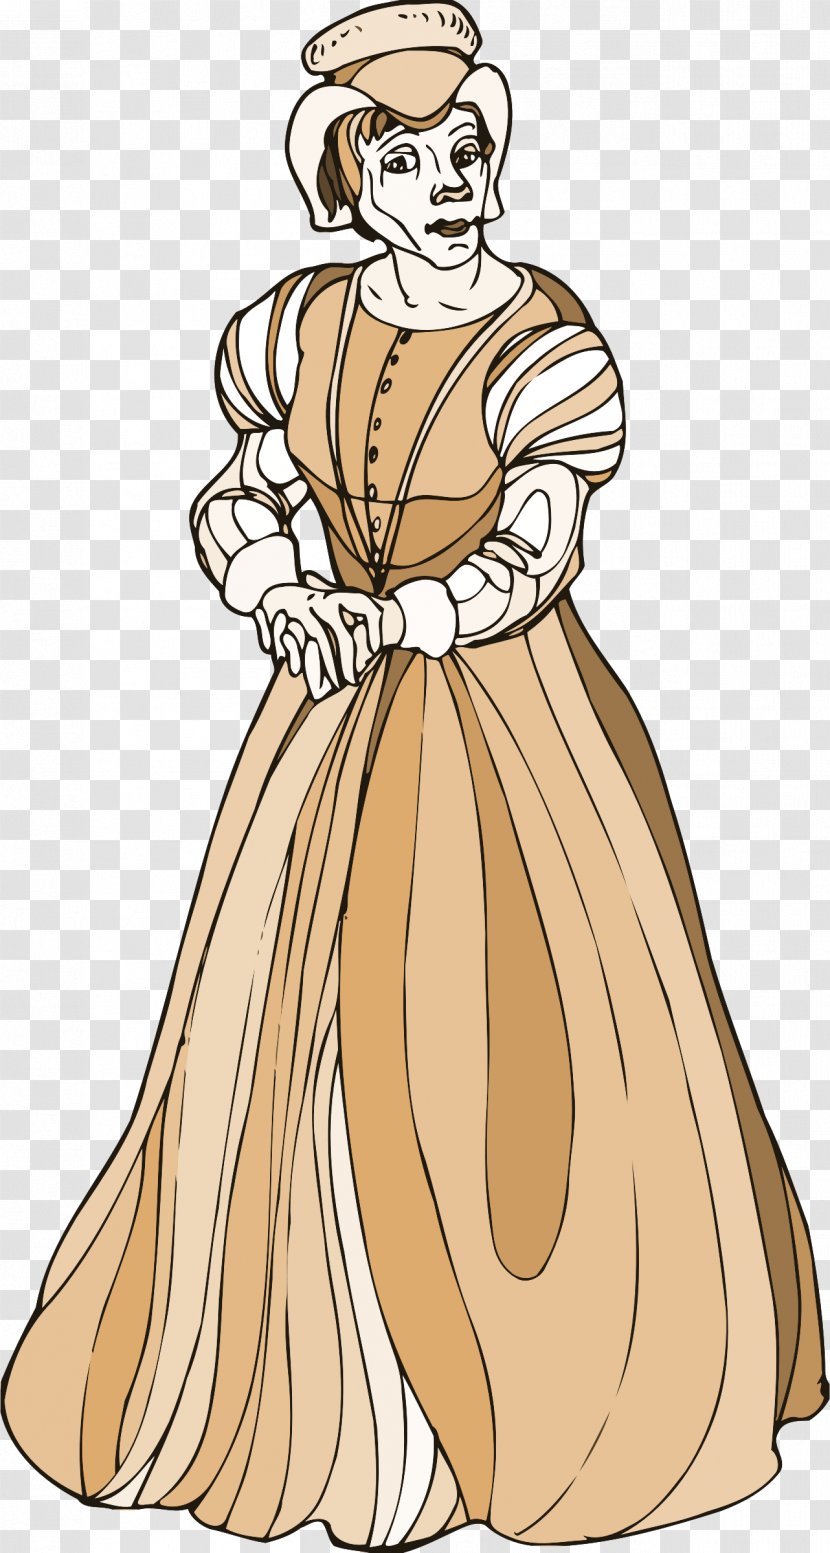 Lady Macbeth Juliet The Tempest King Lear - Shakespeare Apocrypha Transparent PNG